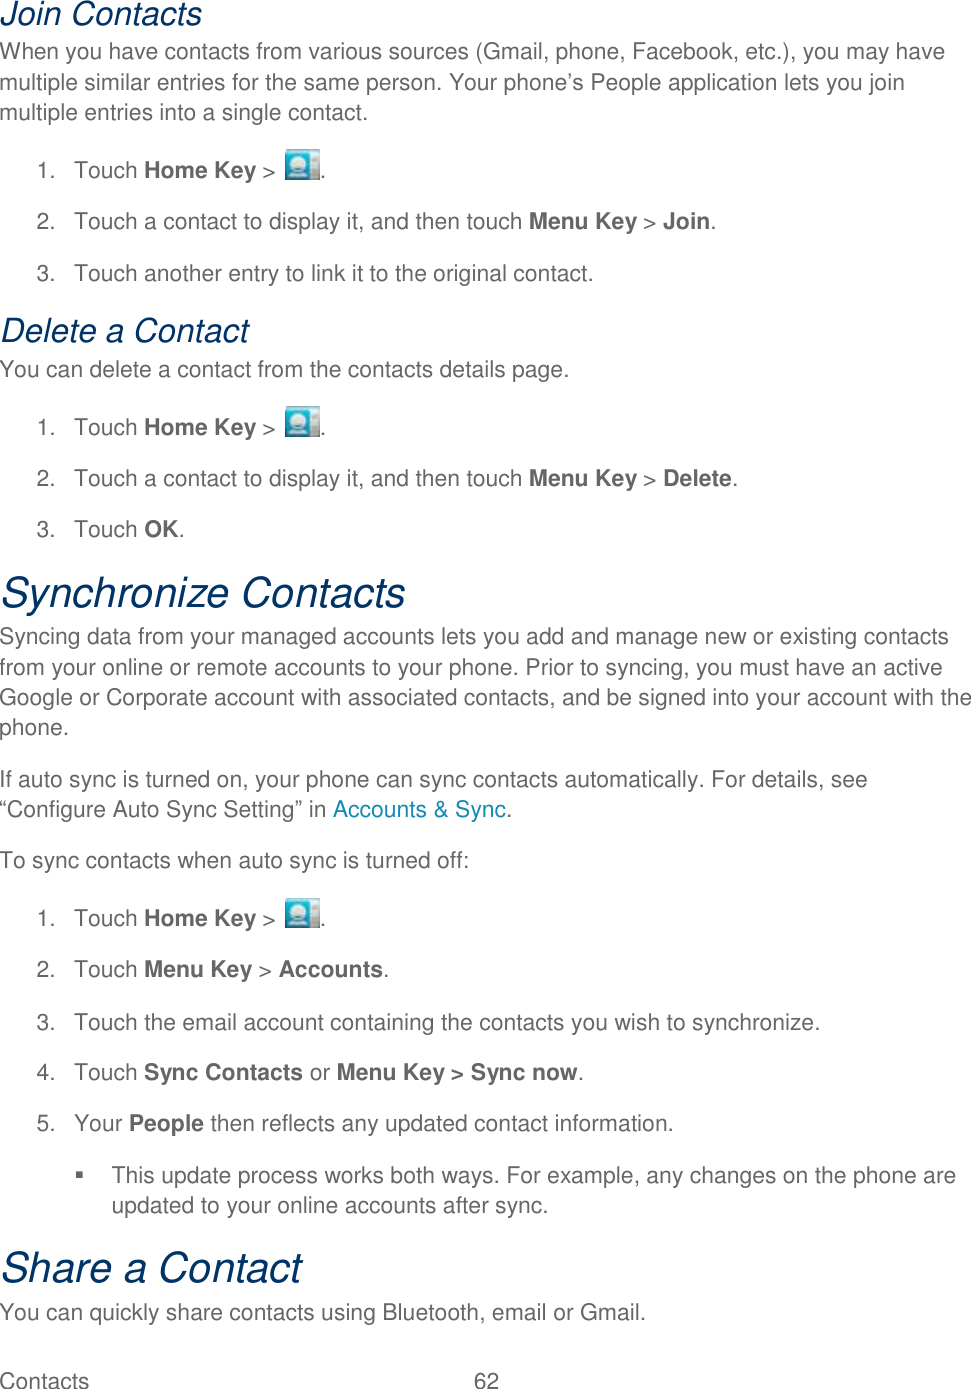 Contacts  62   Join Contacts When you have contacts from various sources (Gmail, phone, Facebook, etc.), you may have multiple similar entries for the same person. Your phone‟s People application lets you join multiple entries into a single contact. 1.  Touch Home Key &gt;  . 2.  Touch a contact to display it, and then touch Menu Key &gt; Join. 3.  Touch another entry to link it to the original contact. Delete a Contact You can delete a contact from the contacts details page. 1.  Touch Home Key &gt;  . 2.  Touch a contact to display it, and then touch Menu Key &gt; Delete. 3.  Touch OK. Synchronize Contacts Syncing data from your managed accounts lets you add and manage new or existing contacts from your online or remote accounts to your phone. Prior to syncing, you must have an active Google or Corporate account with associated contacts, and be signed into your account with the phone. If auto sync is turned on, your phone can sync contacts automatically. For details, see “Configure Auto Sync Setting” in Accounts &amp; Sync. To sync contacts when auto sync is turned off: 1.  Touch Home Key &gt;  . 2.  Touch Menu Key &gt; Accounts. 3.  Touch the email account containing the contacts you wish to synchronize. 4.  Touch Sync Contacts or Menu Key &gt; Sync now. 5.  Your People then reflects any updated contact information.   This update process works both ways. For example, any changes on the phone are updated to your online accounts after sync. Share a Contact You can quickly share contacts using Bluetooth, email or Gmail. 